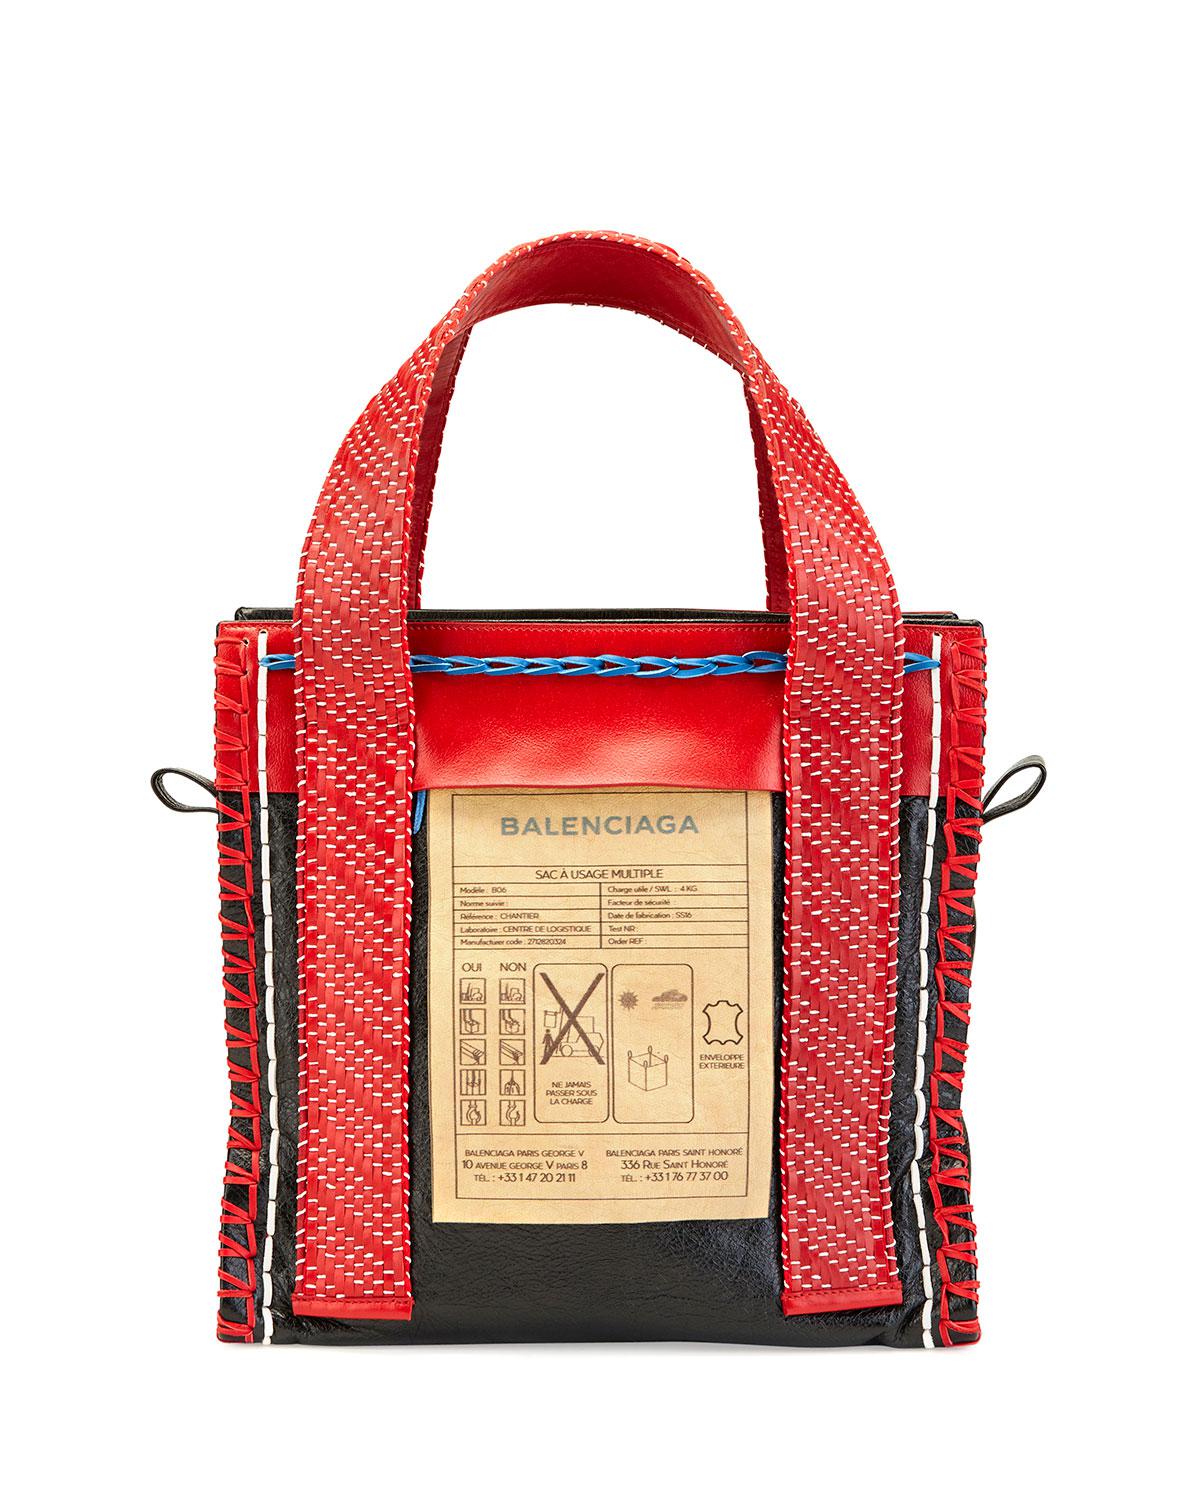 Balenciaga Scaffold Leather Tote Bag in Red - Lyst